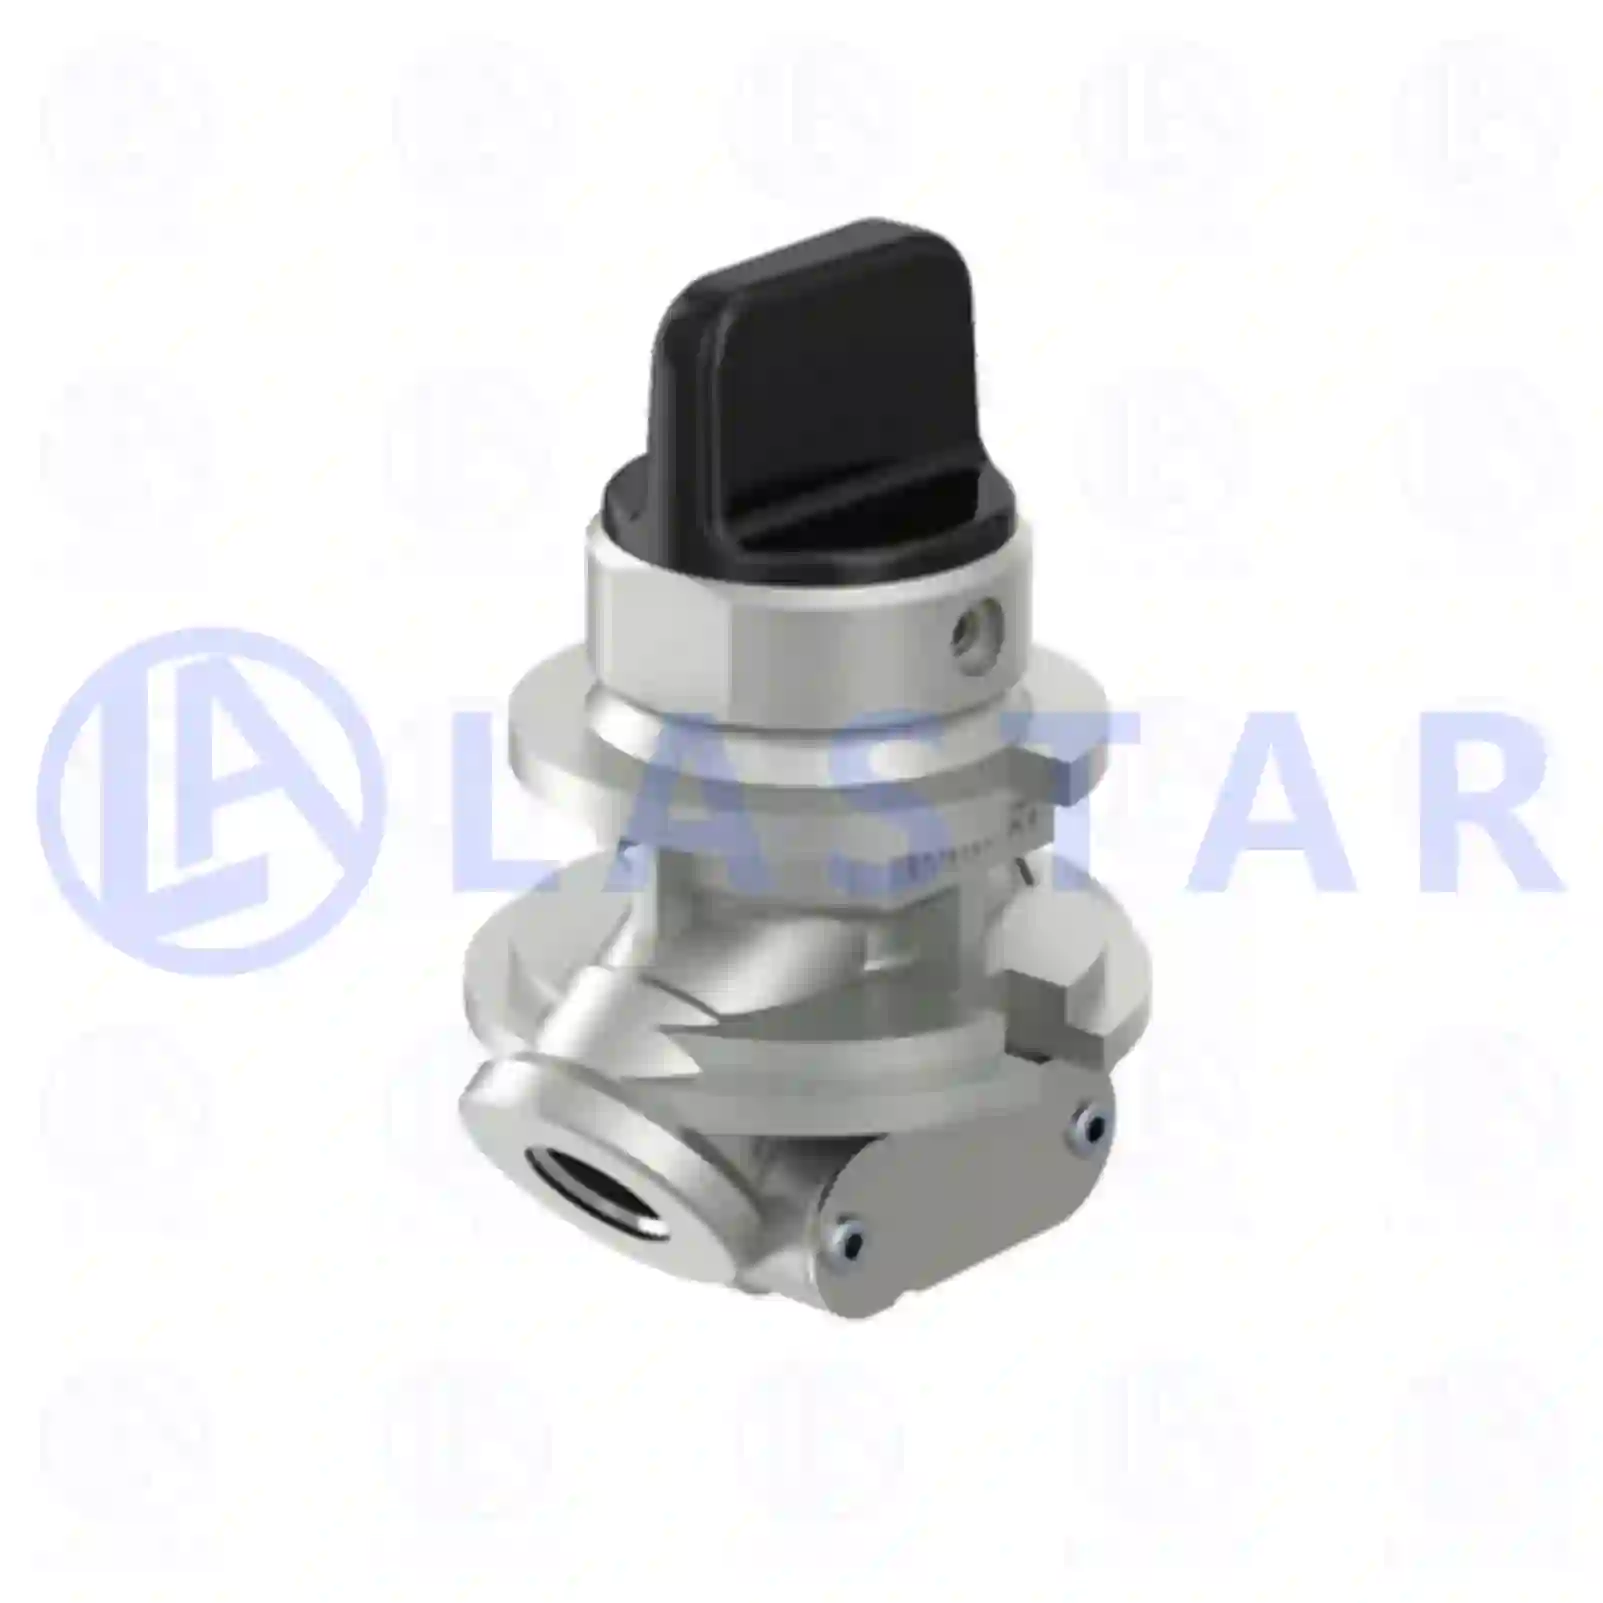 Valve, with nut, 77731943, 0243112800, 1505080, 2140302017, 42008943, 42009273, 71005255, 314907, 04630360000, 81521856015, 81521856016, 81521856017, 81521856022, 81521856023, 81521856025, 81521856046, 81521859023, 81521859046, 85500011586, 0019975036, 0019976136, 0019976136S, 0039975936, 0039976036, 4630360000, 4630360010, 5000806590, 1934917, 1934918 ||  77731943 Lastar Spare Part | Truck Spare Parts, Auotomotive Spare Parts Valve, with nut, 77731943, 0243112800, 1505080, 2140302017, 42008943, 42009273, 71005255, 314907, 04630360000, 81521856015, 81521856016, 81521856017, 81521856022, 81521856023, 81521856025, 81521856046, 81521859023, 81521859046, 85500011586, 0019975036, 0019976136, 0019976136S, 0039975936, 0039976036, 4630360000, 4630360010, 5000806590, 1934917, 1934918 ||  77731943 Lastar Spare Part | Truck Spare Parts, Auotomotive Spare Parts